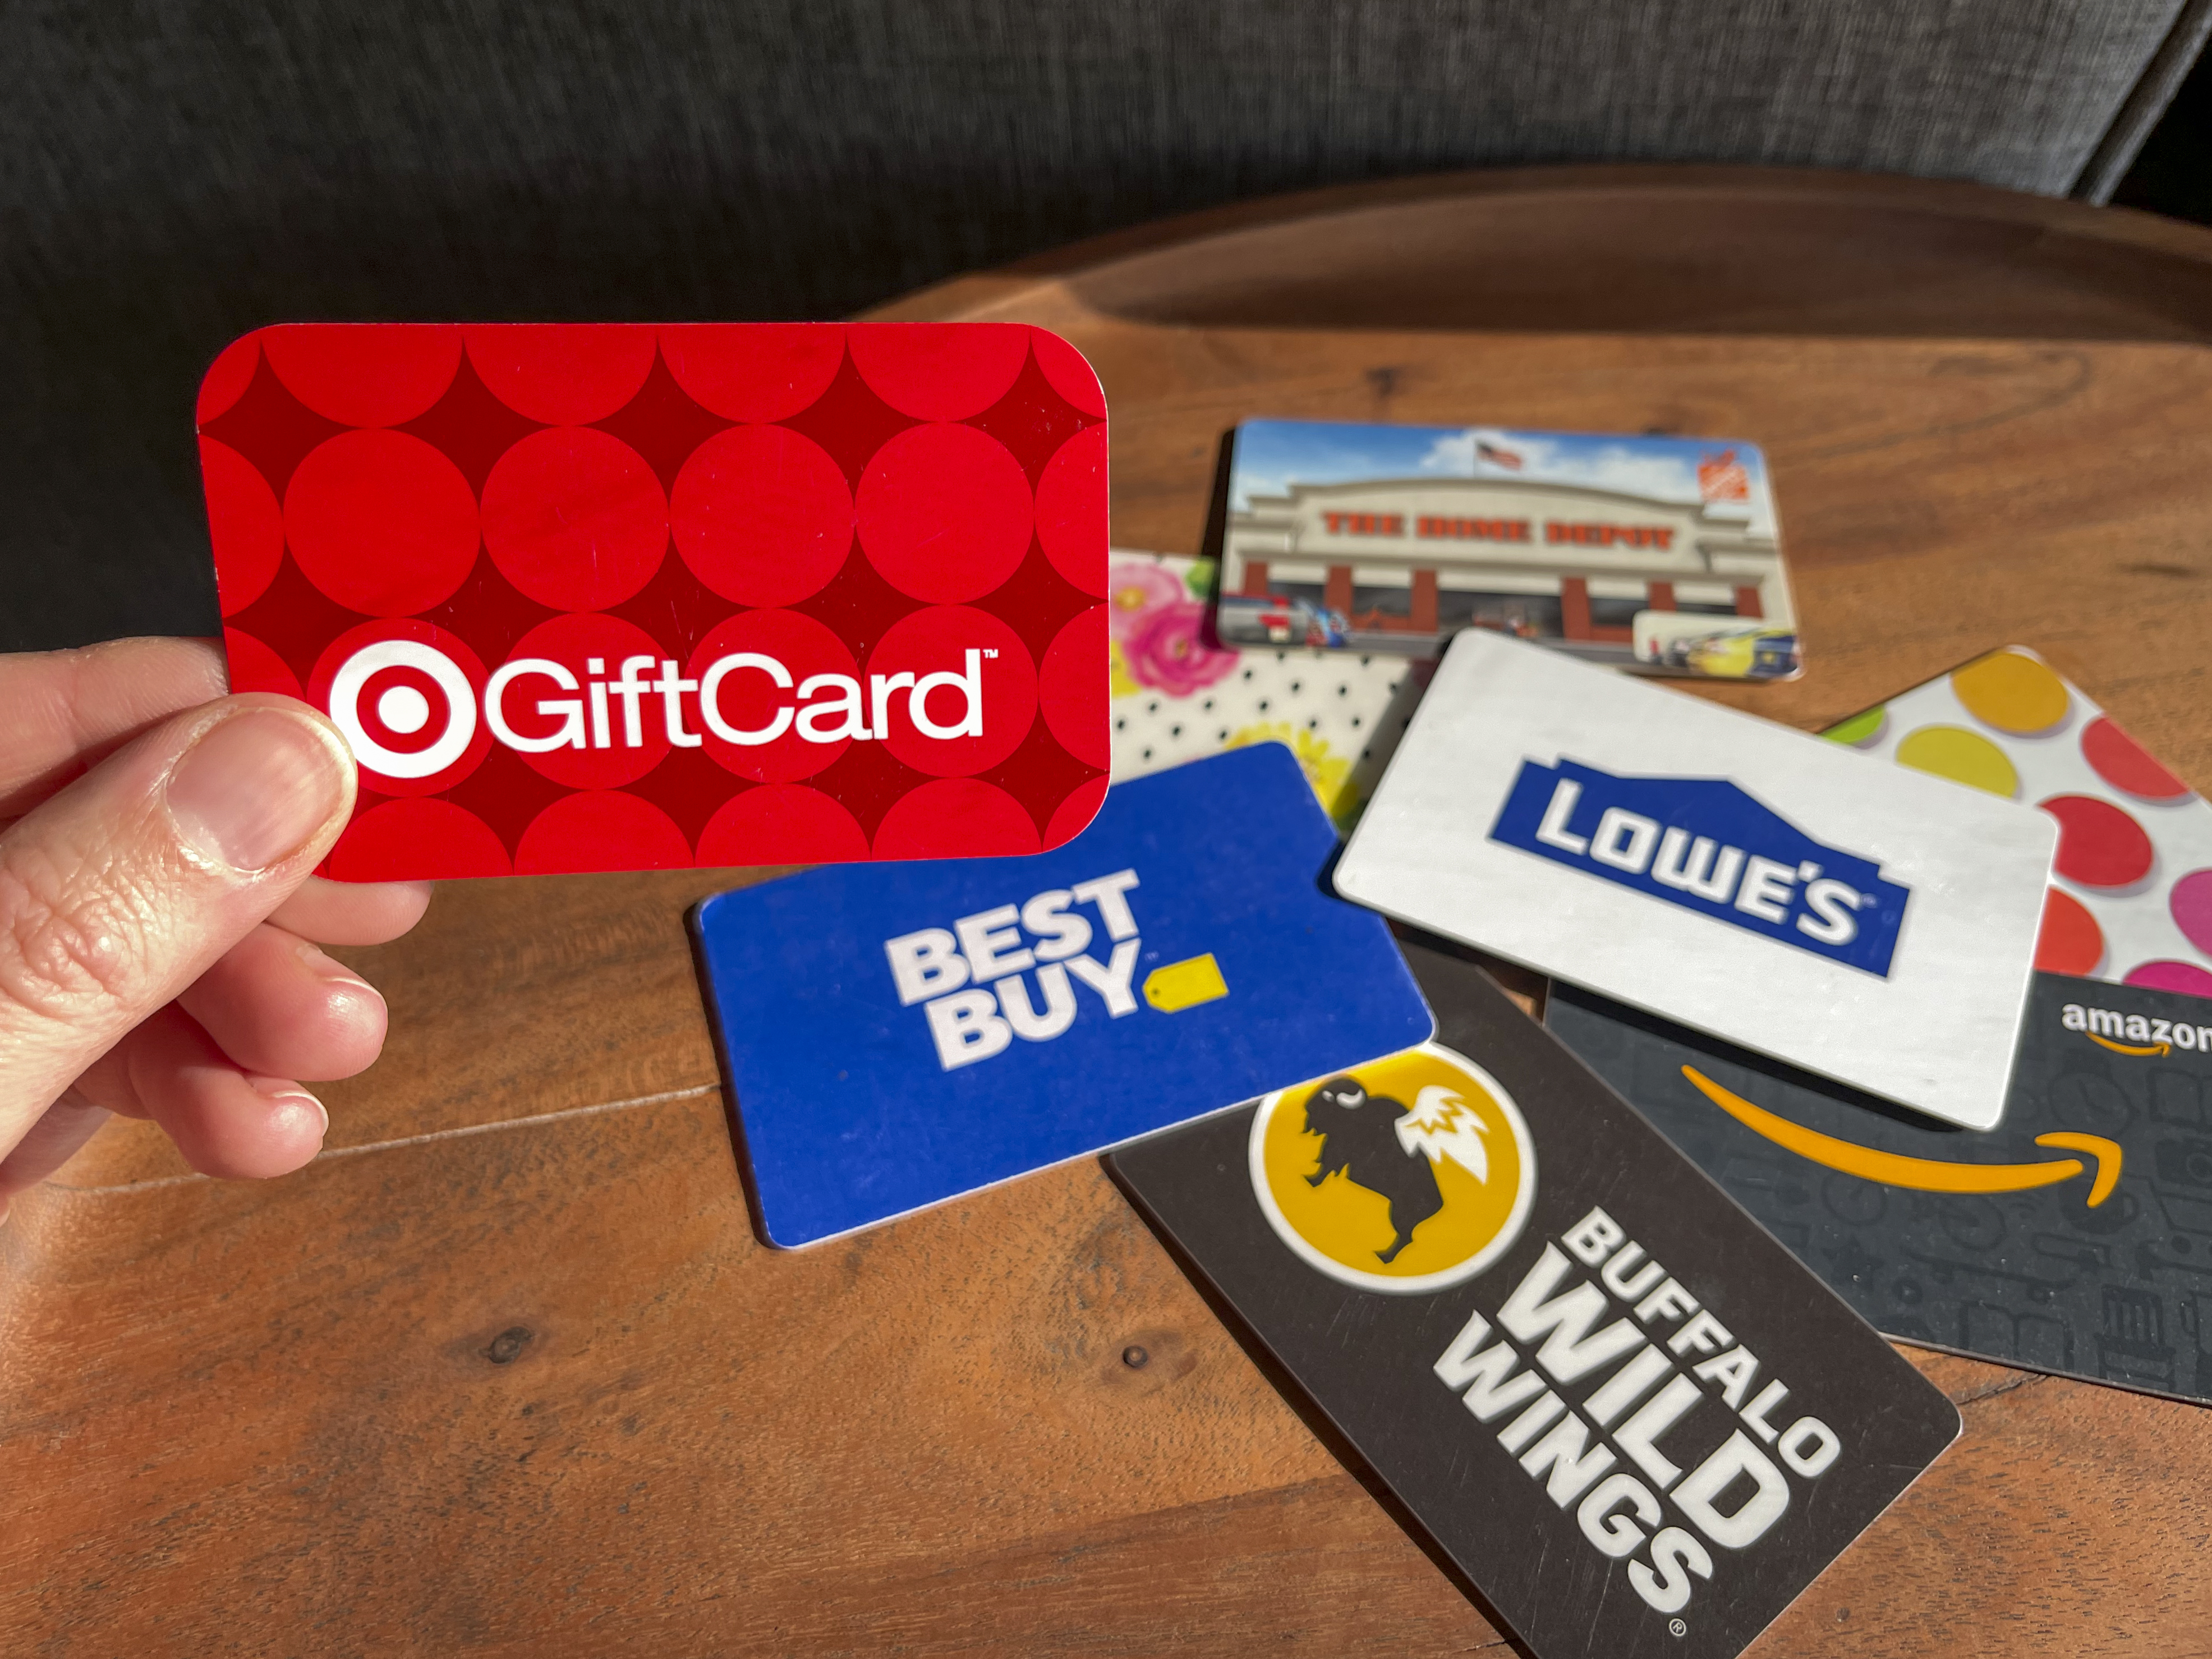 FREE $10 Target Gift Card w/ $100 Apple Gift Card Purchase